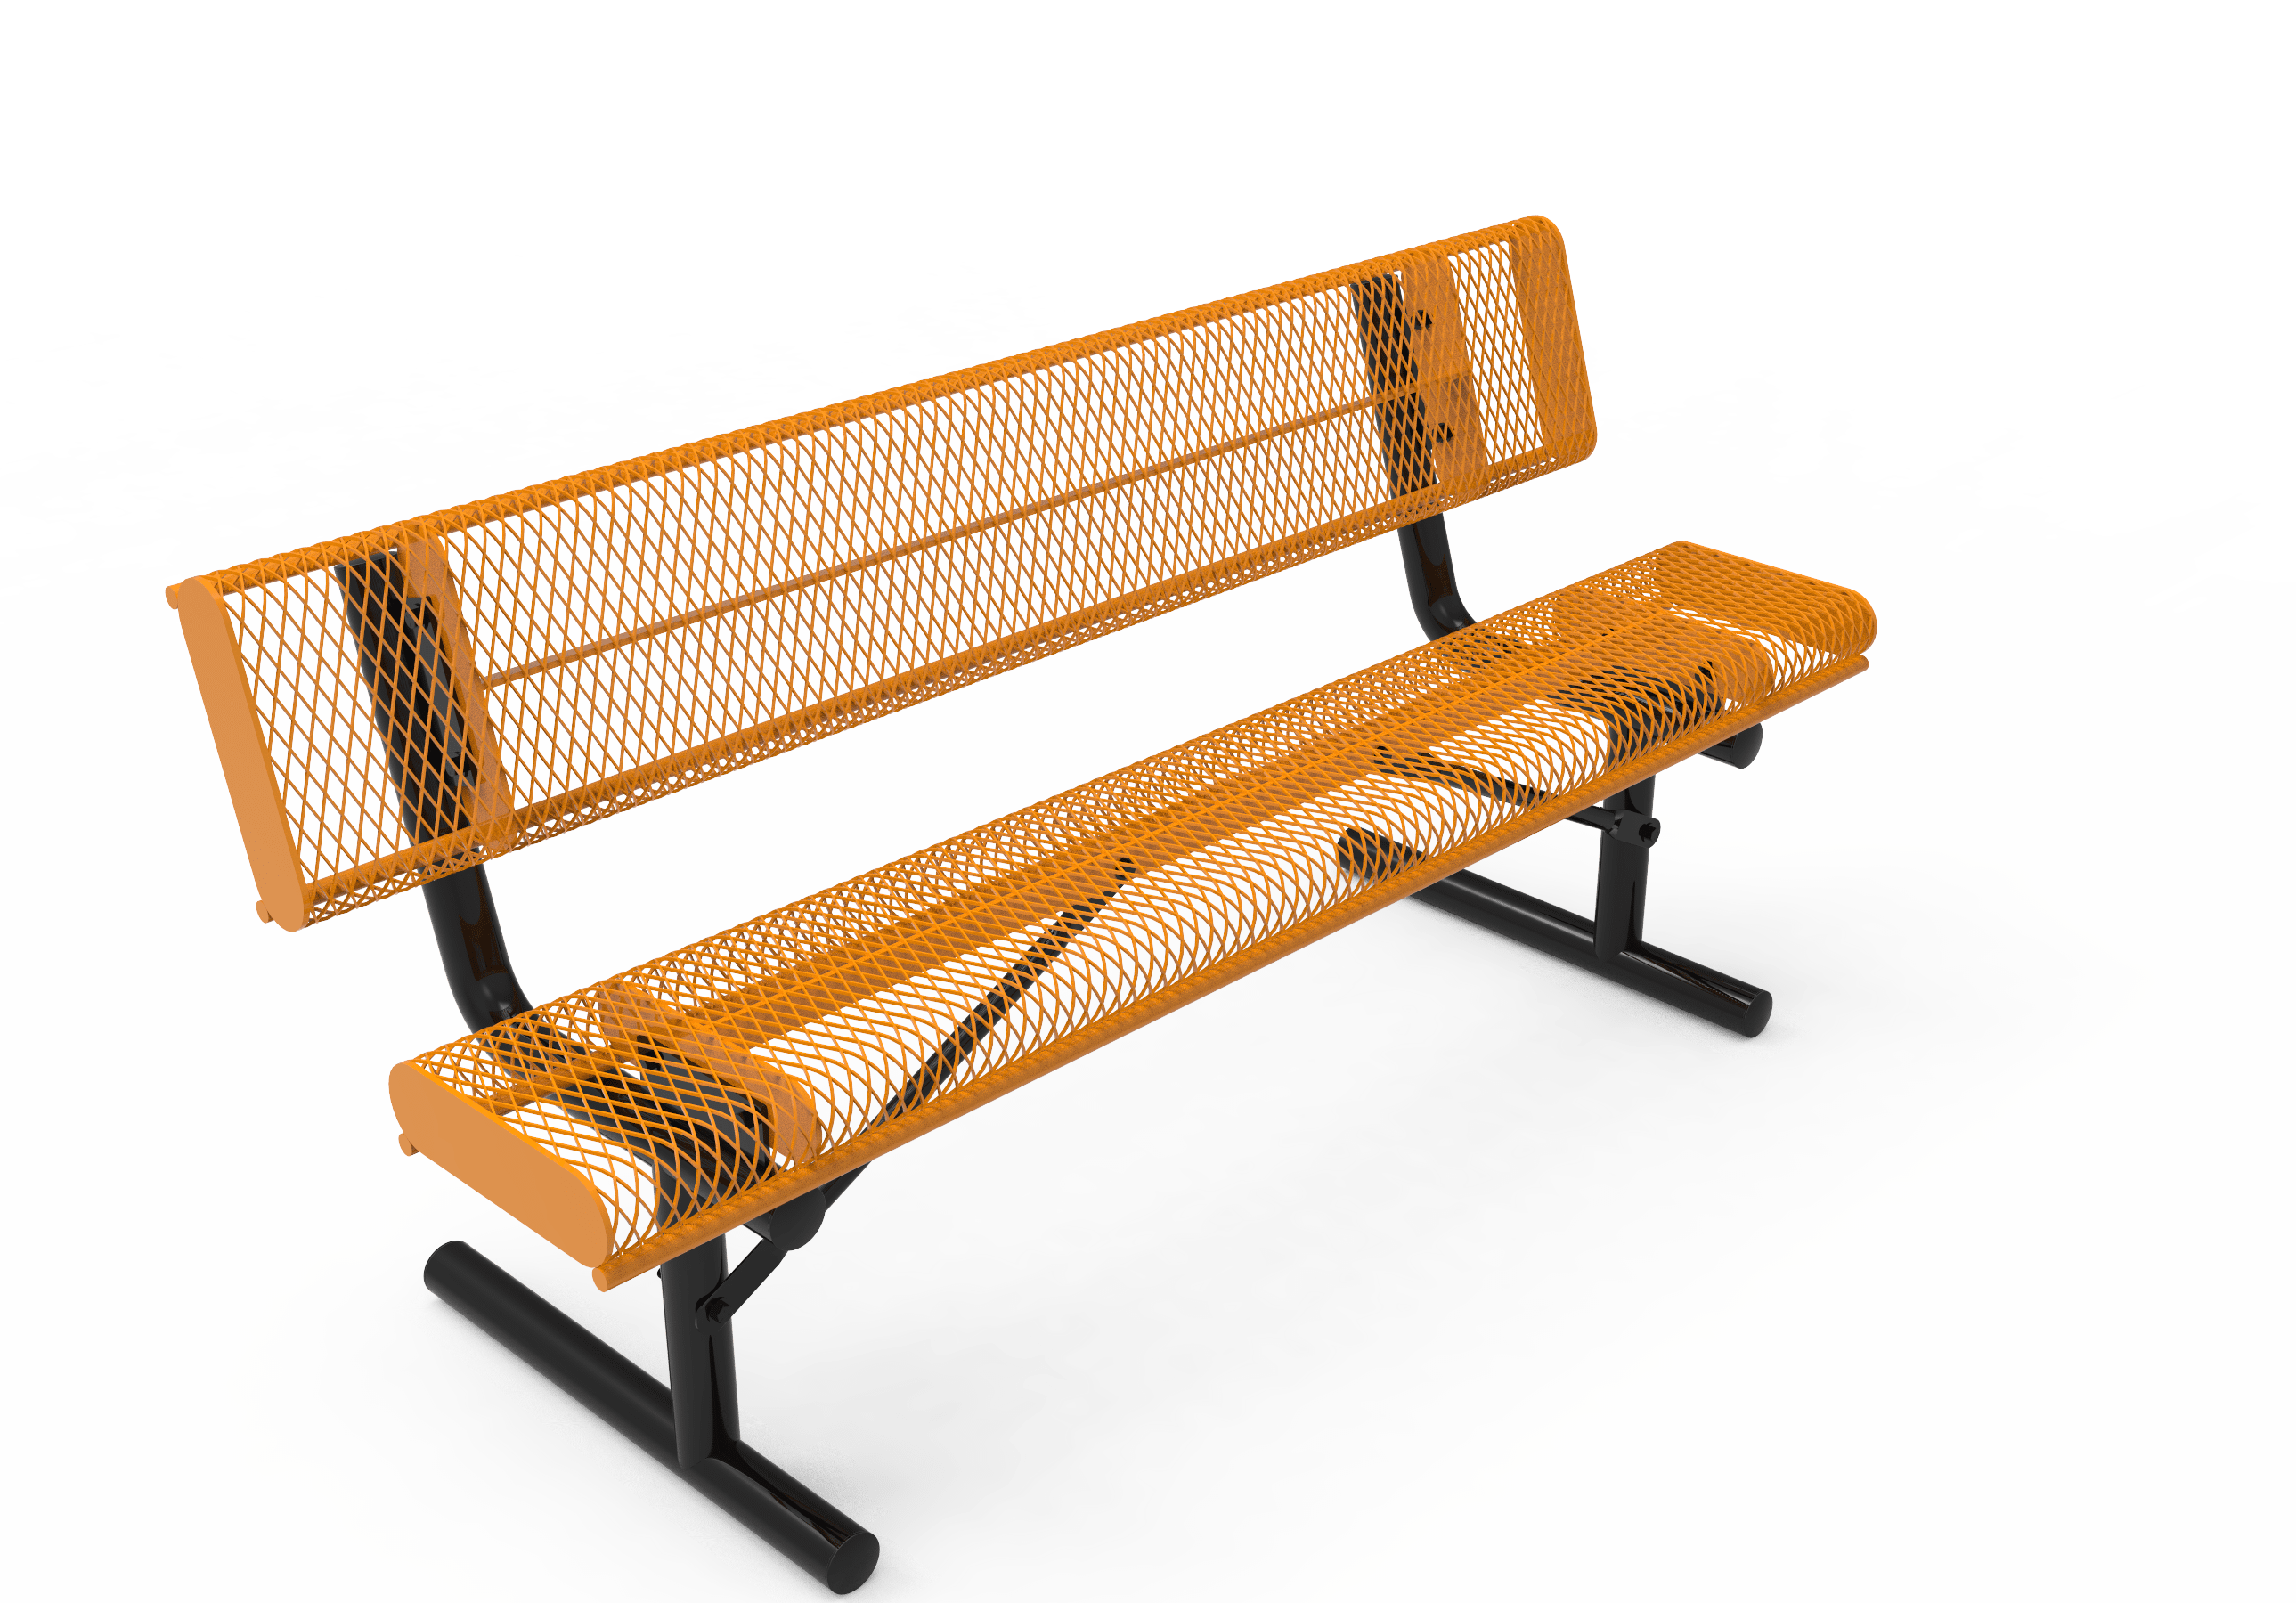 4′ Rolled Bench With Back-Mesh
BRE04-C-18-000
Industry Standard Finish
$649.00
BRE04-A-18-000
Advantage Premium Finish
$799.00
